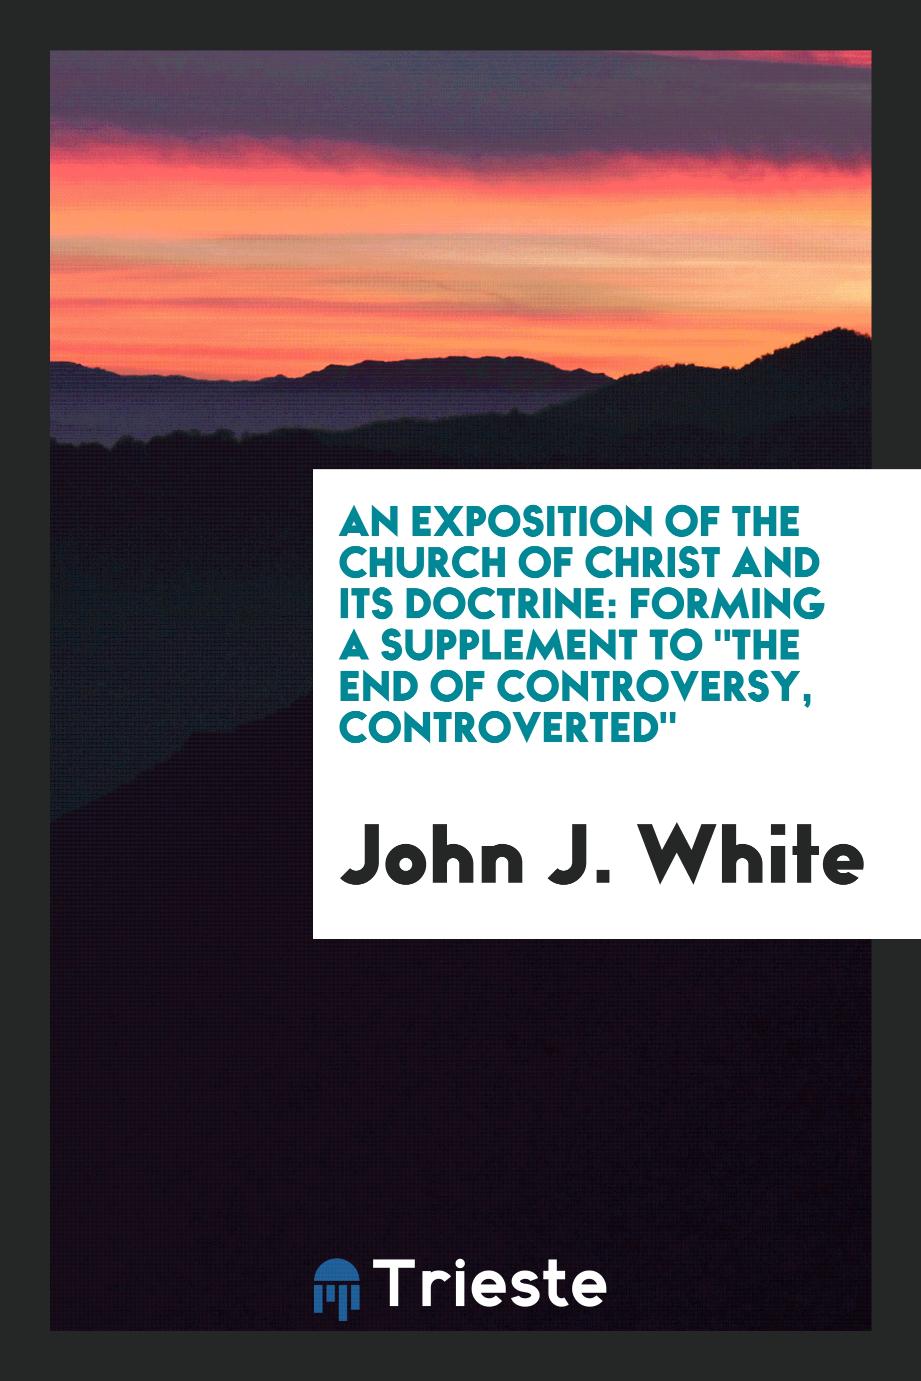 An exposition of the Church of Christ and its doctrine: forming a supplement to "the end of controversy, controverted"